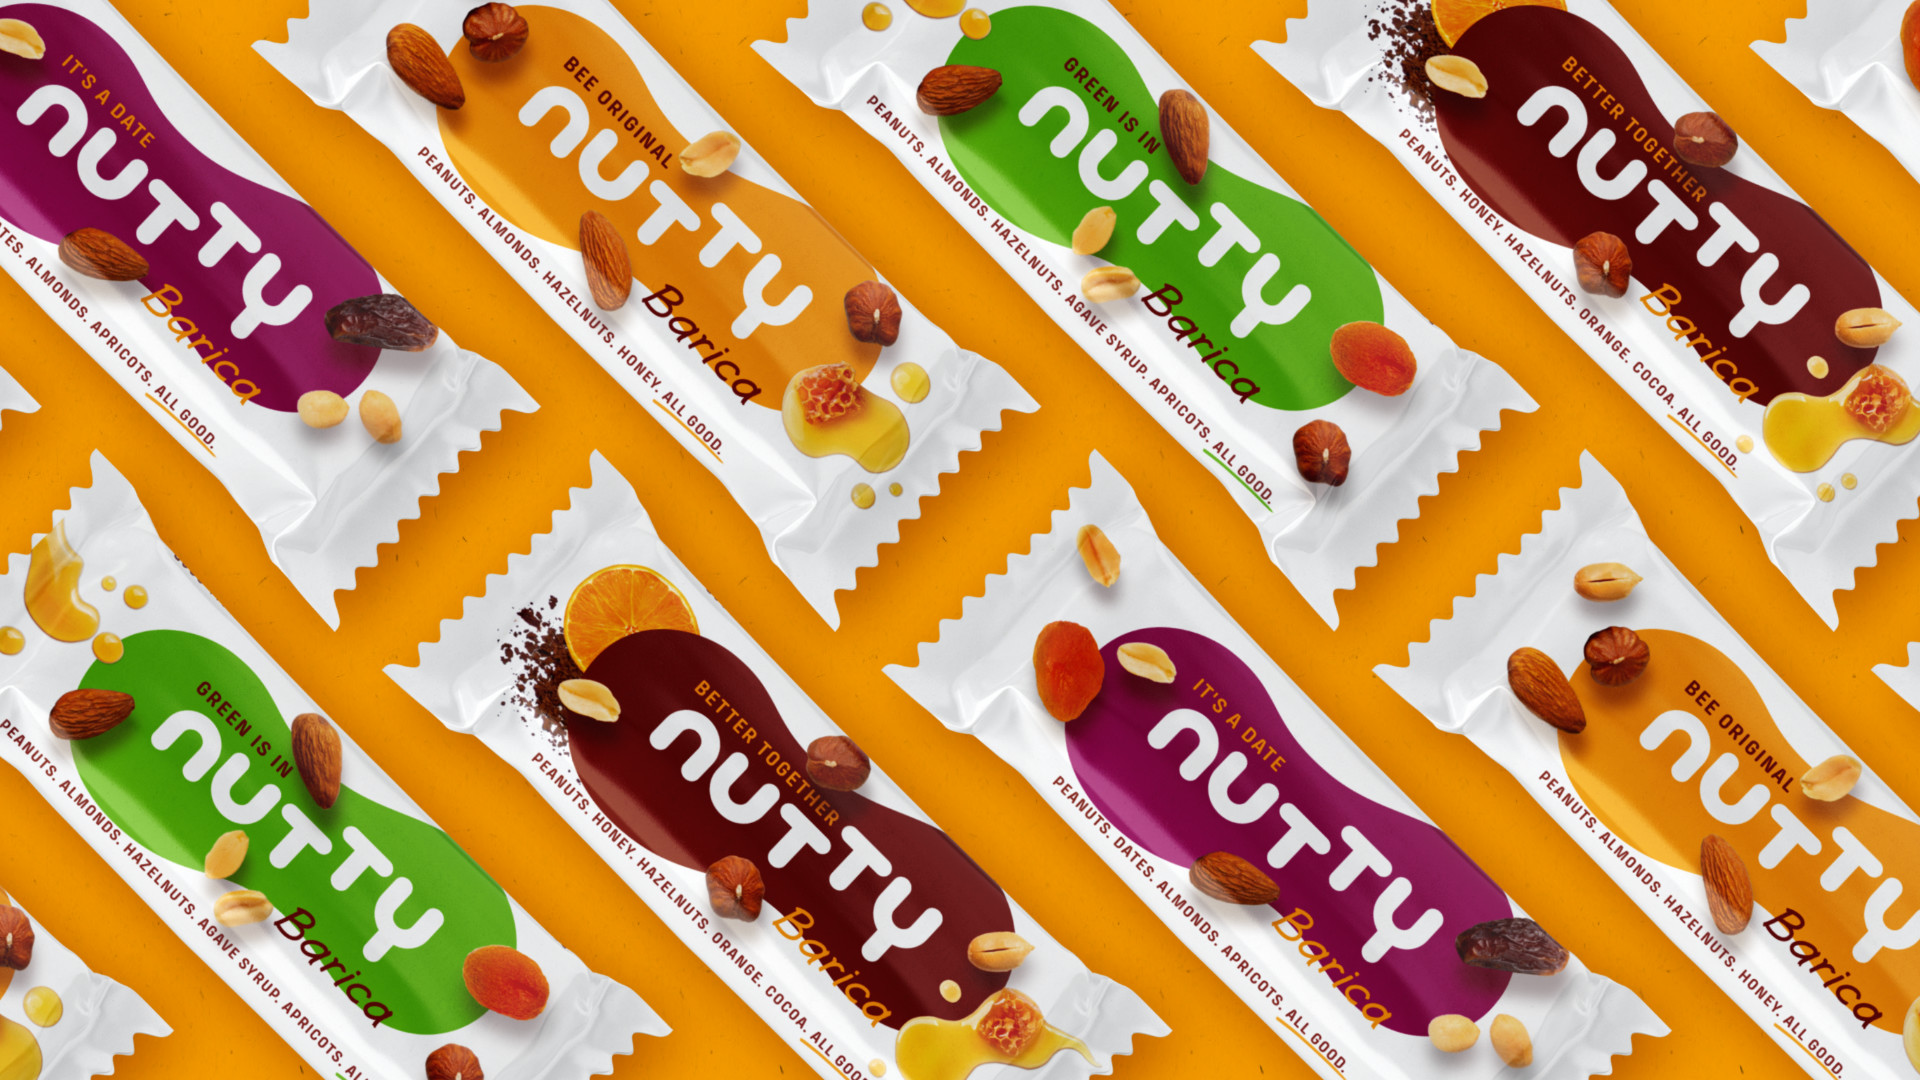 Filburg Create New Packaging Design and Website Design for Tasty Nutty Bars